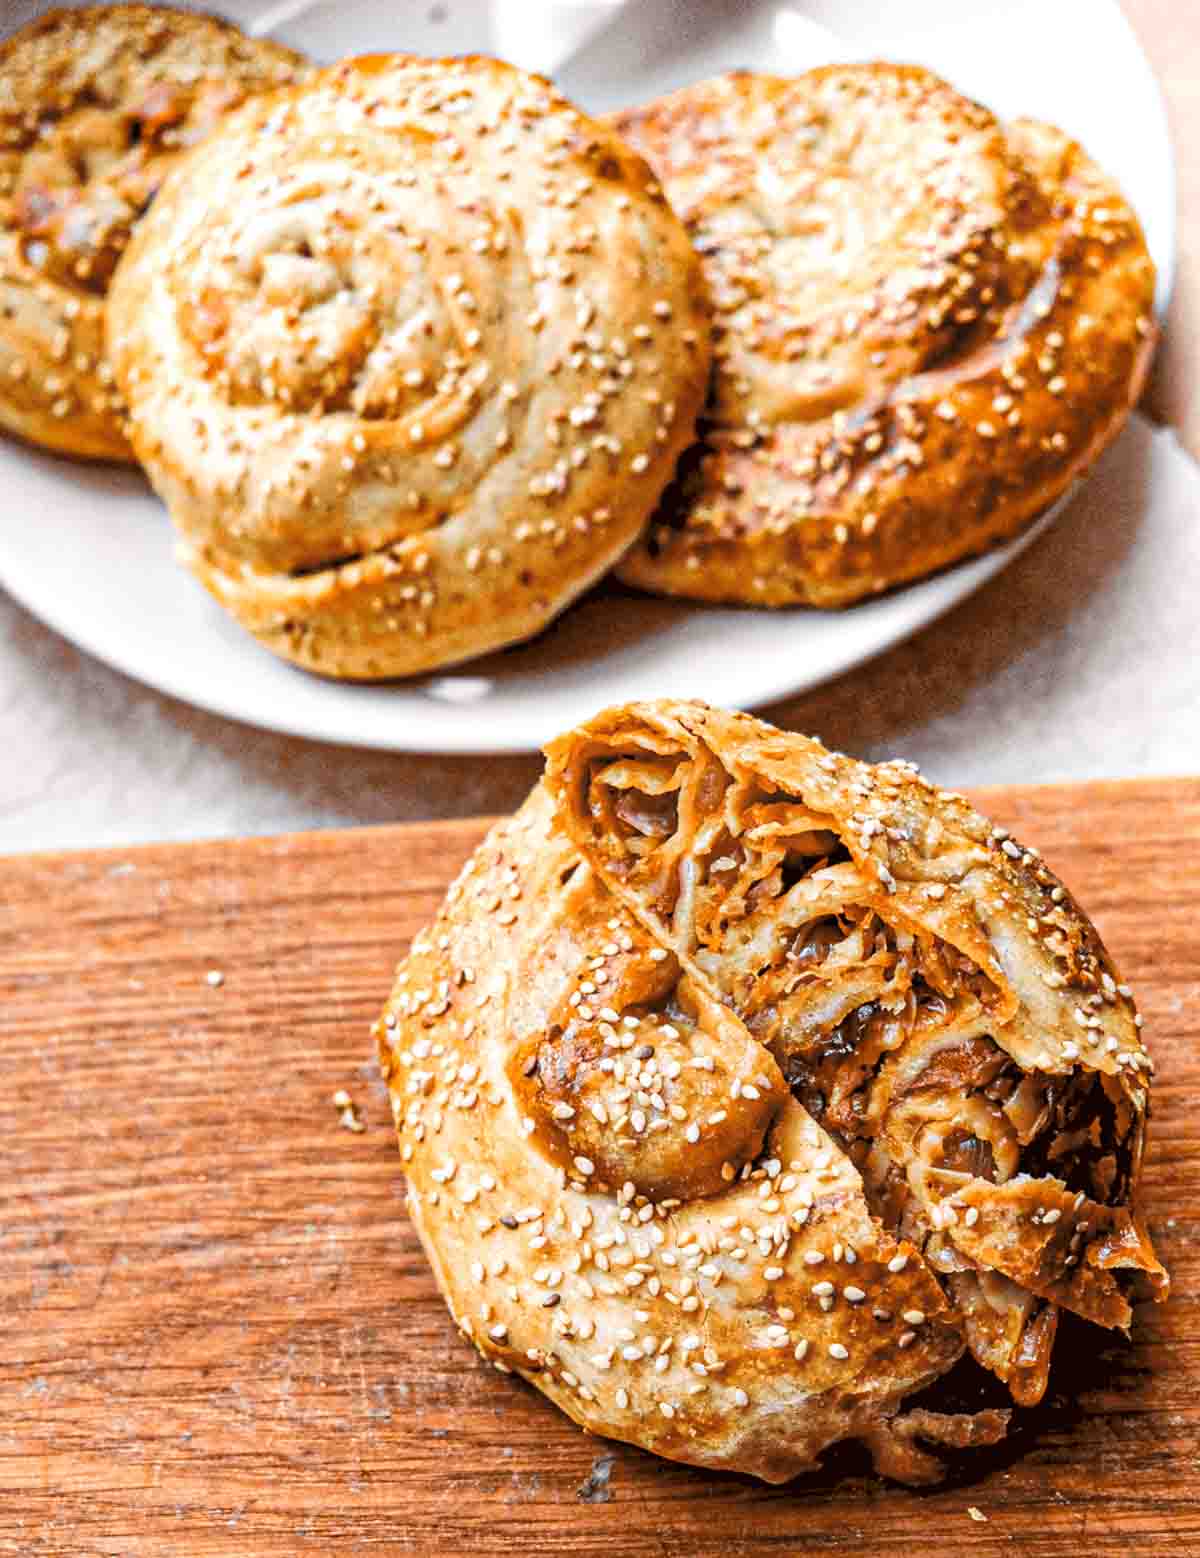 In the foreground there is a cabbage phyllo spiral that has been cut in half to show the layers of dough and cabbage on the inside. In the background there is a bowl of golden phyllo spiral buns with sesame seeds on top.